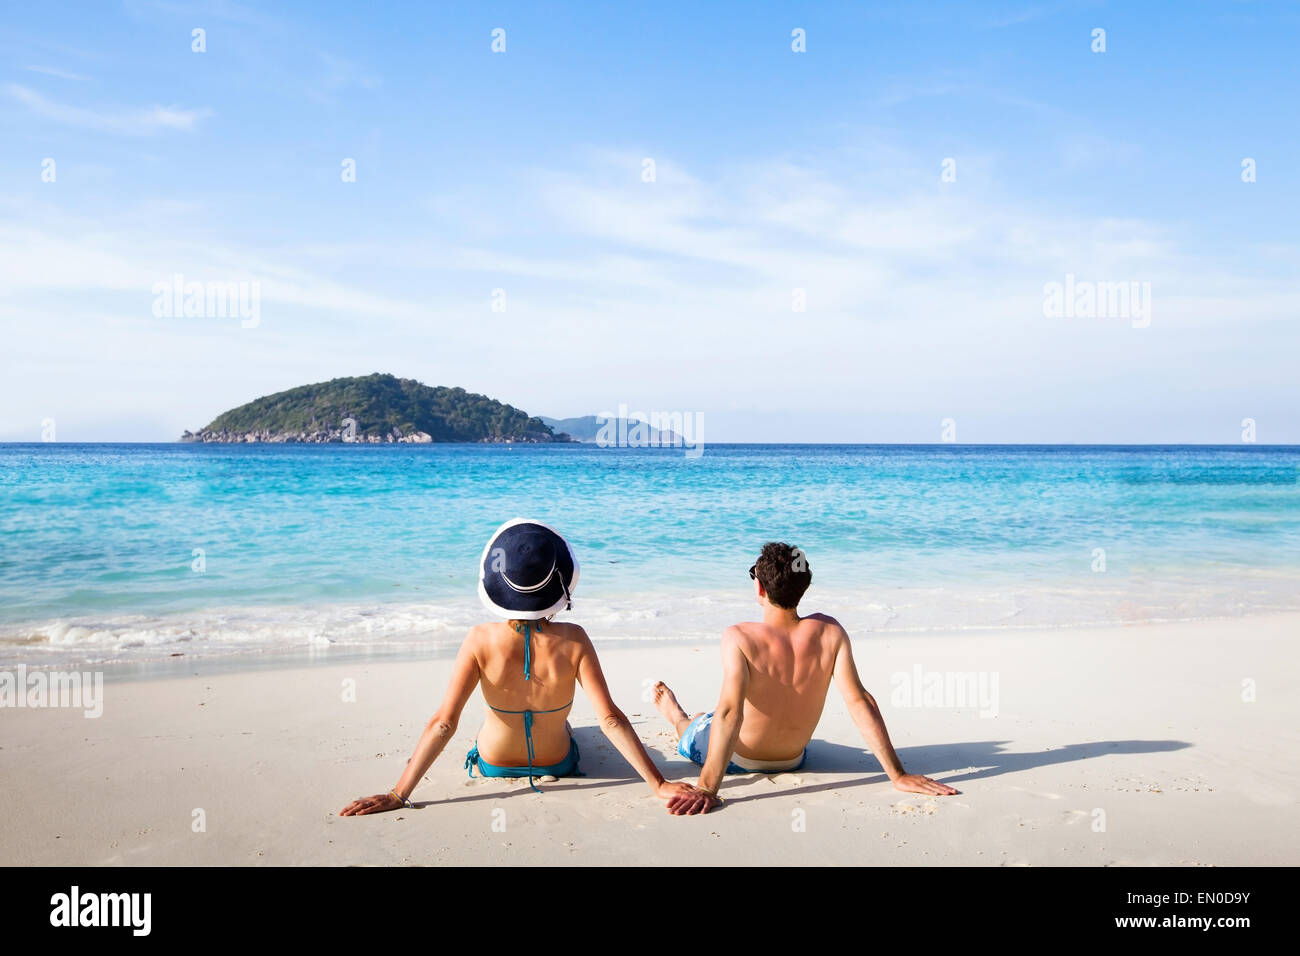 honeymoon destination, young happy couple relaxing on paradise beach Stock Photo